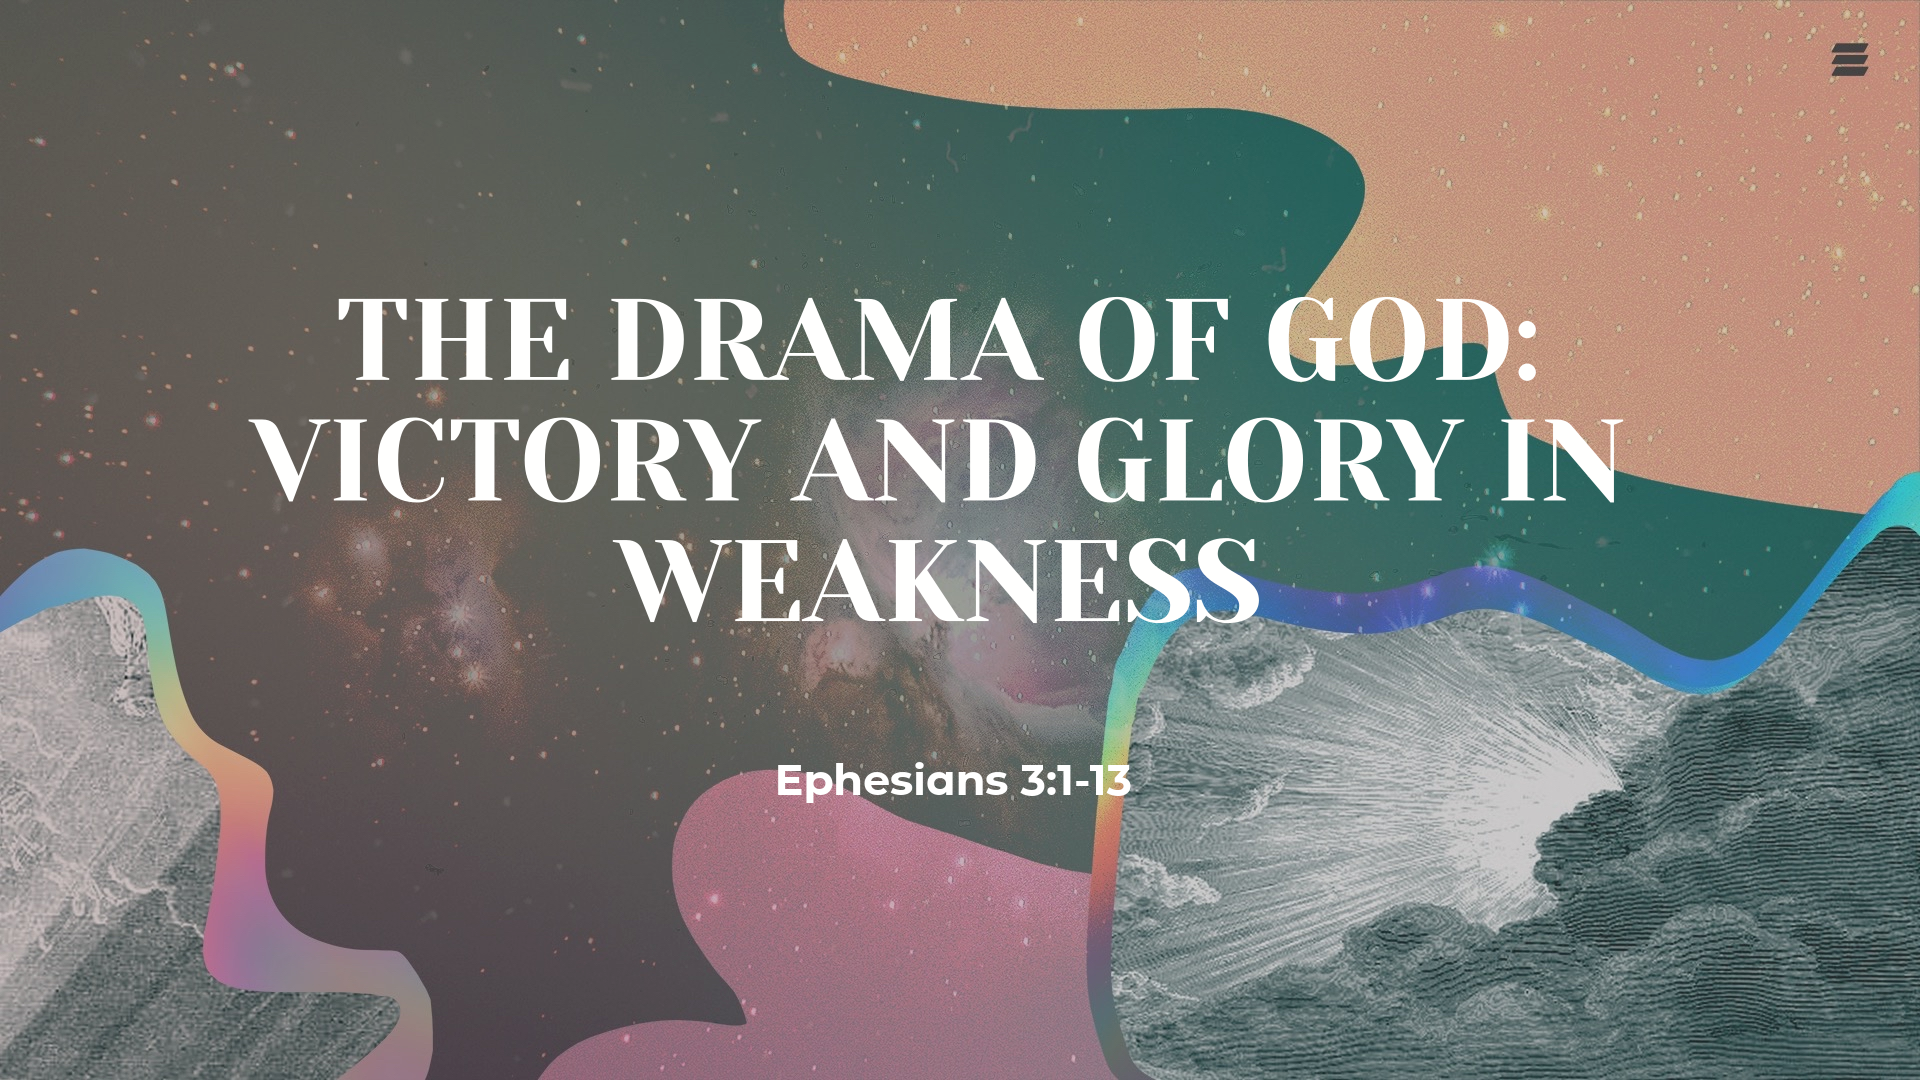 May 16, 2021 - The Drama of God: Victory and Glory in Weakness (Video) Ephesians 3: 1-13